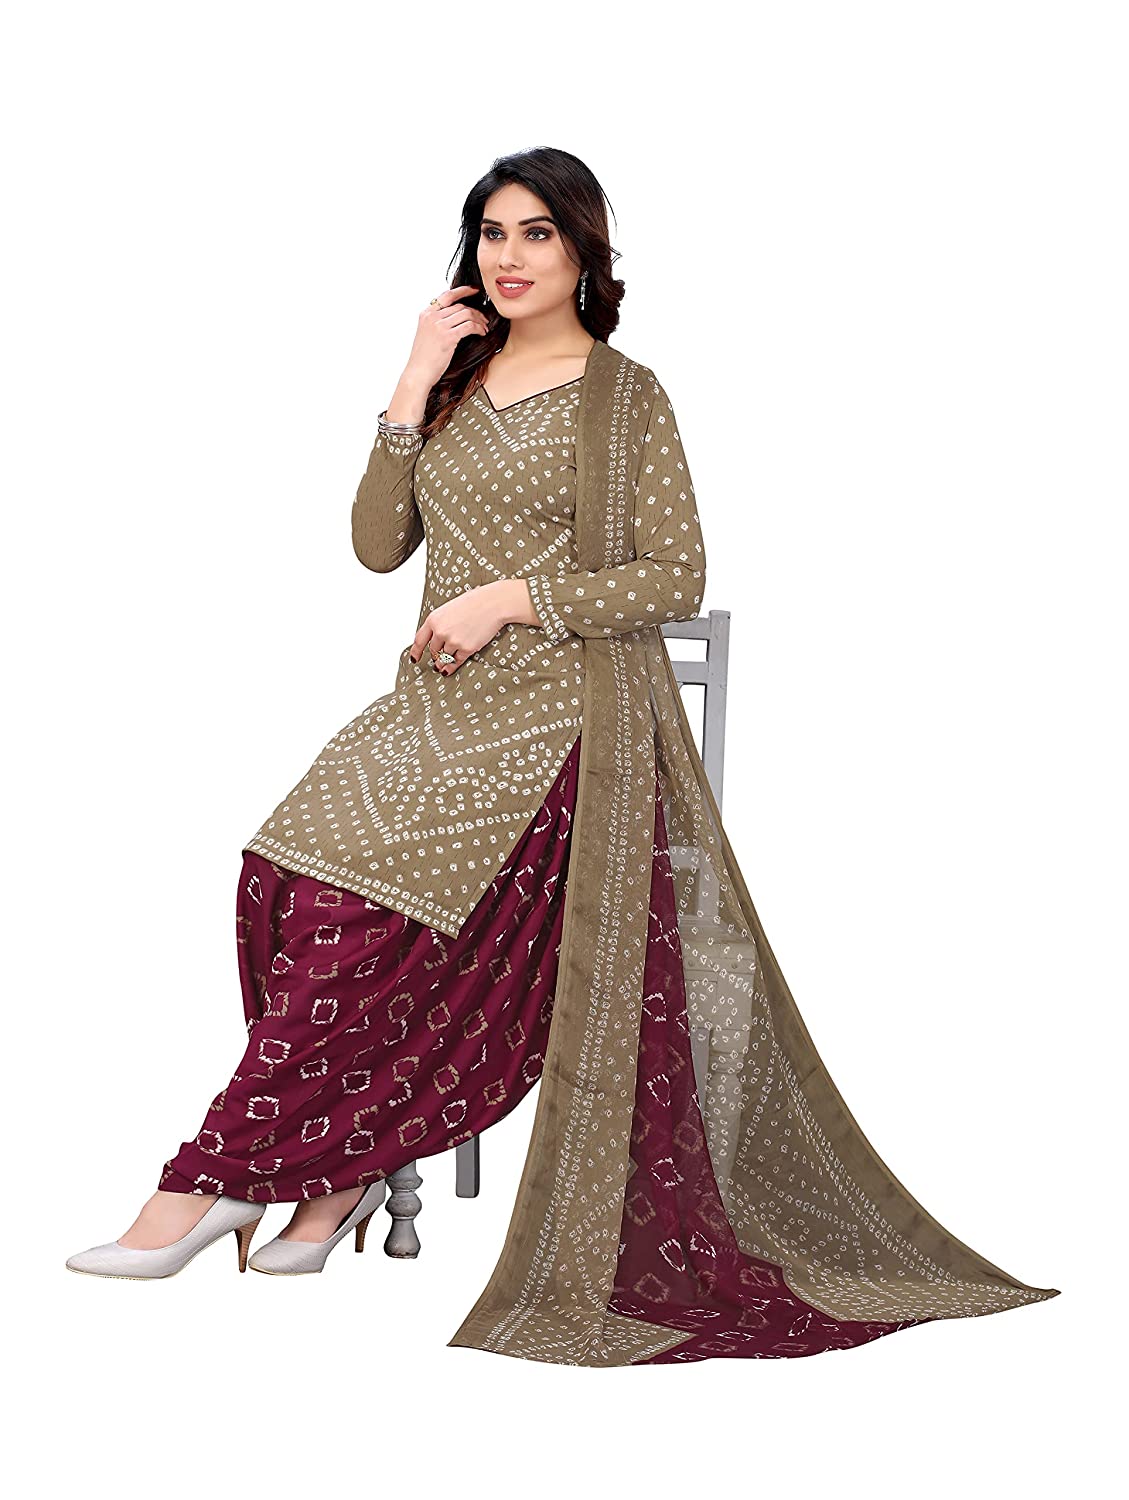 Buy Salwar Studio Cotton Dress Material For Women - Sand Colour at Amazon.in